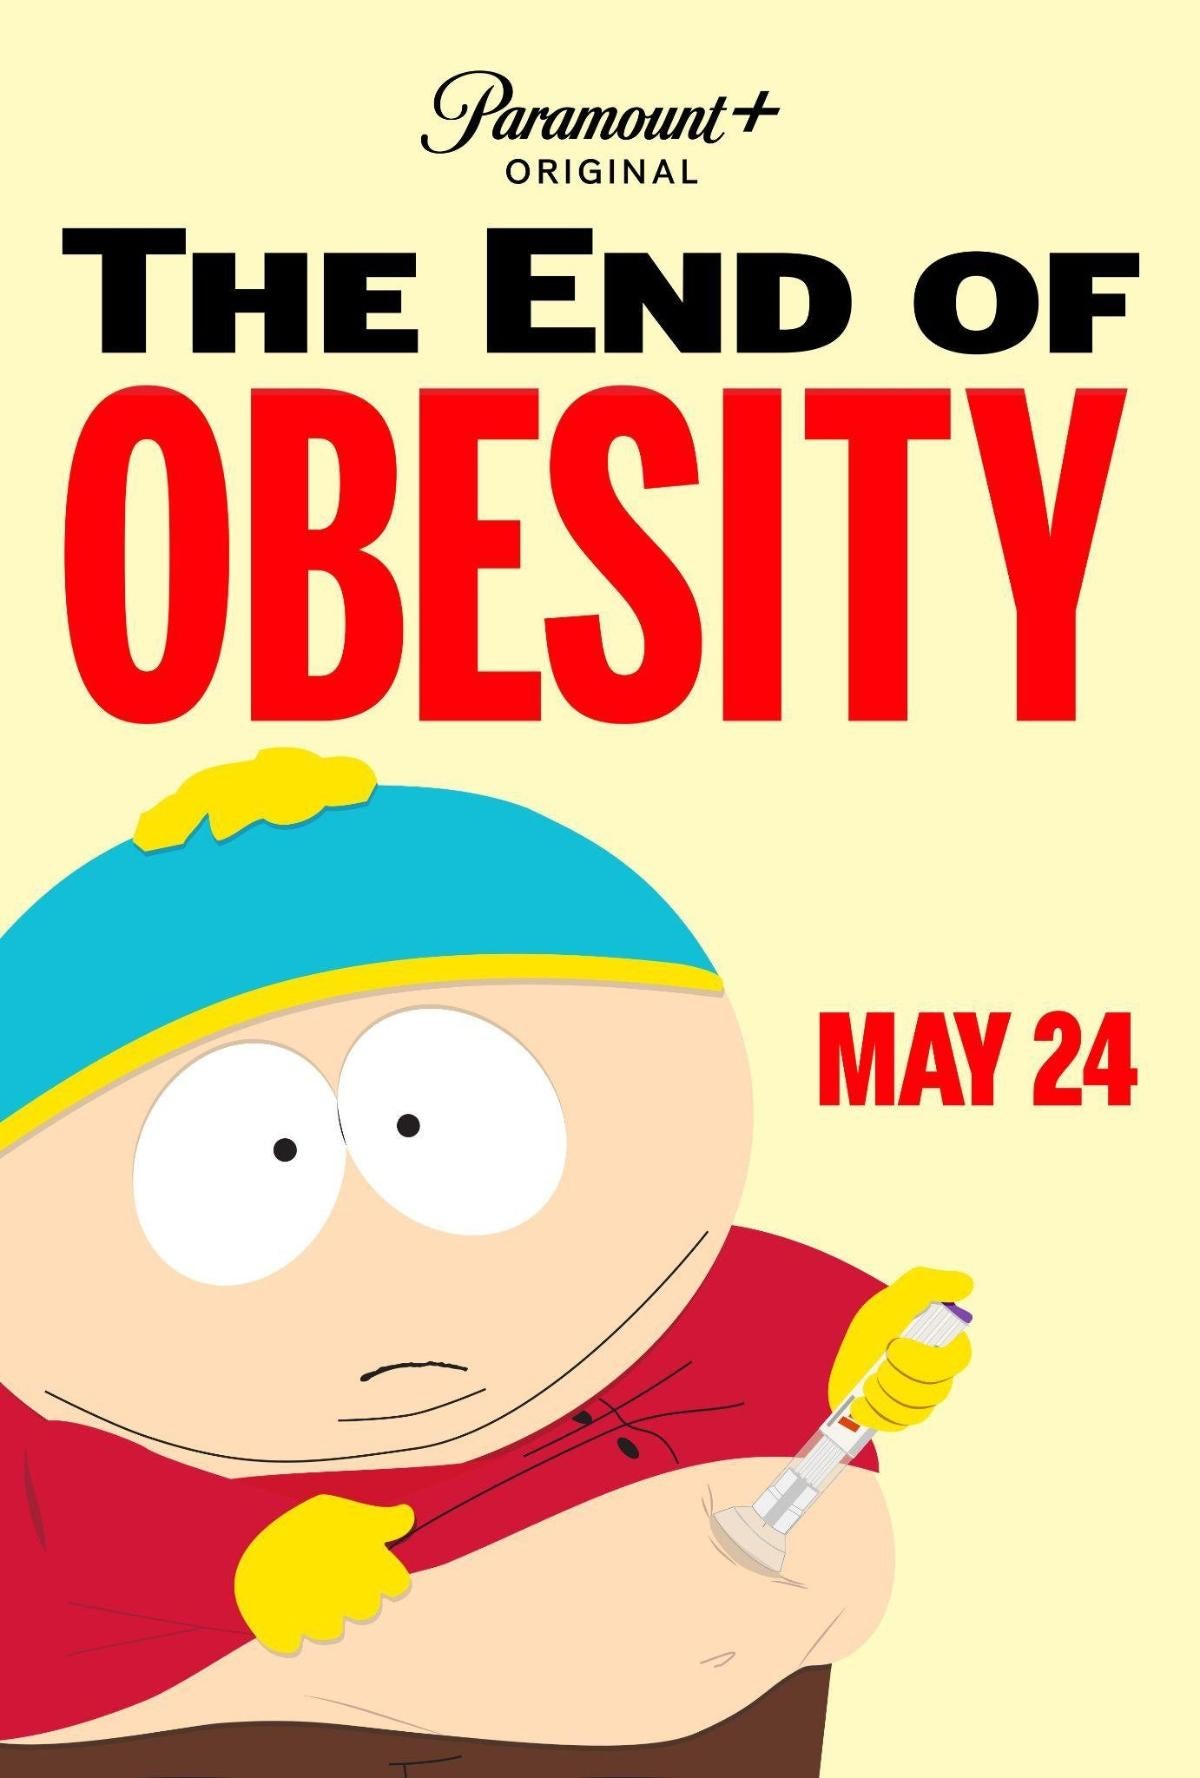 south-park-the-end-of-obesity-paramount-plus-poster.jpg